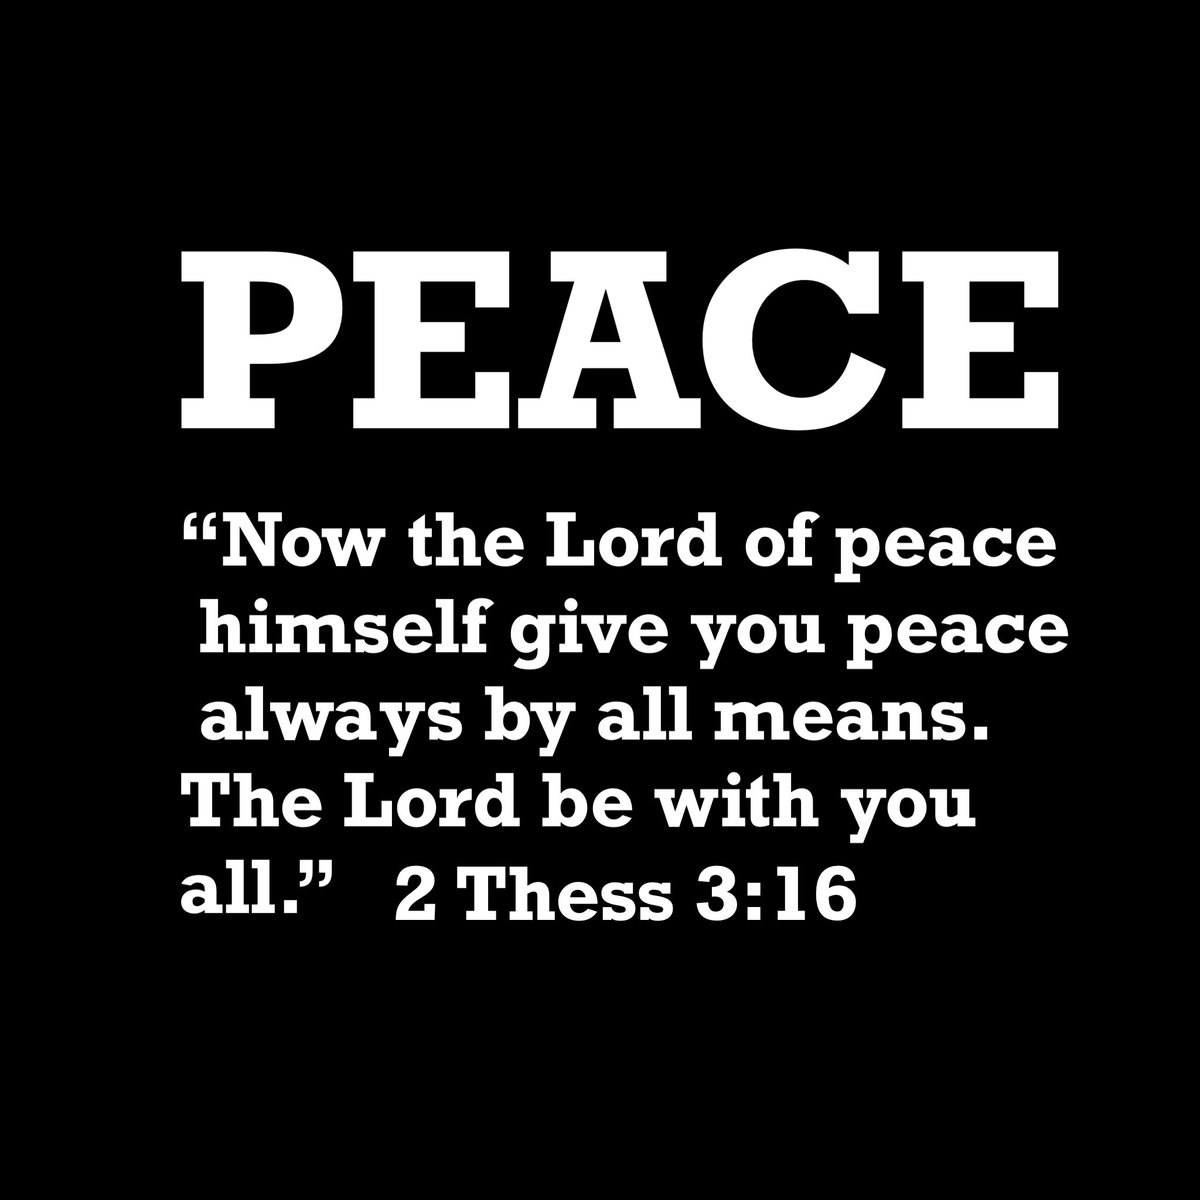 Whatever has tampered with your peace. Whatever area of your life is tensed and troubled. Whatever is giving you sleepless nights, causing you to fret and panic, May the Lord of Peace Himself, The very prince of peace, give you peace BY ALL MEANS, in Jesus’ name.  Amen.